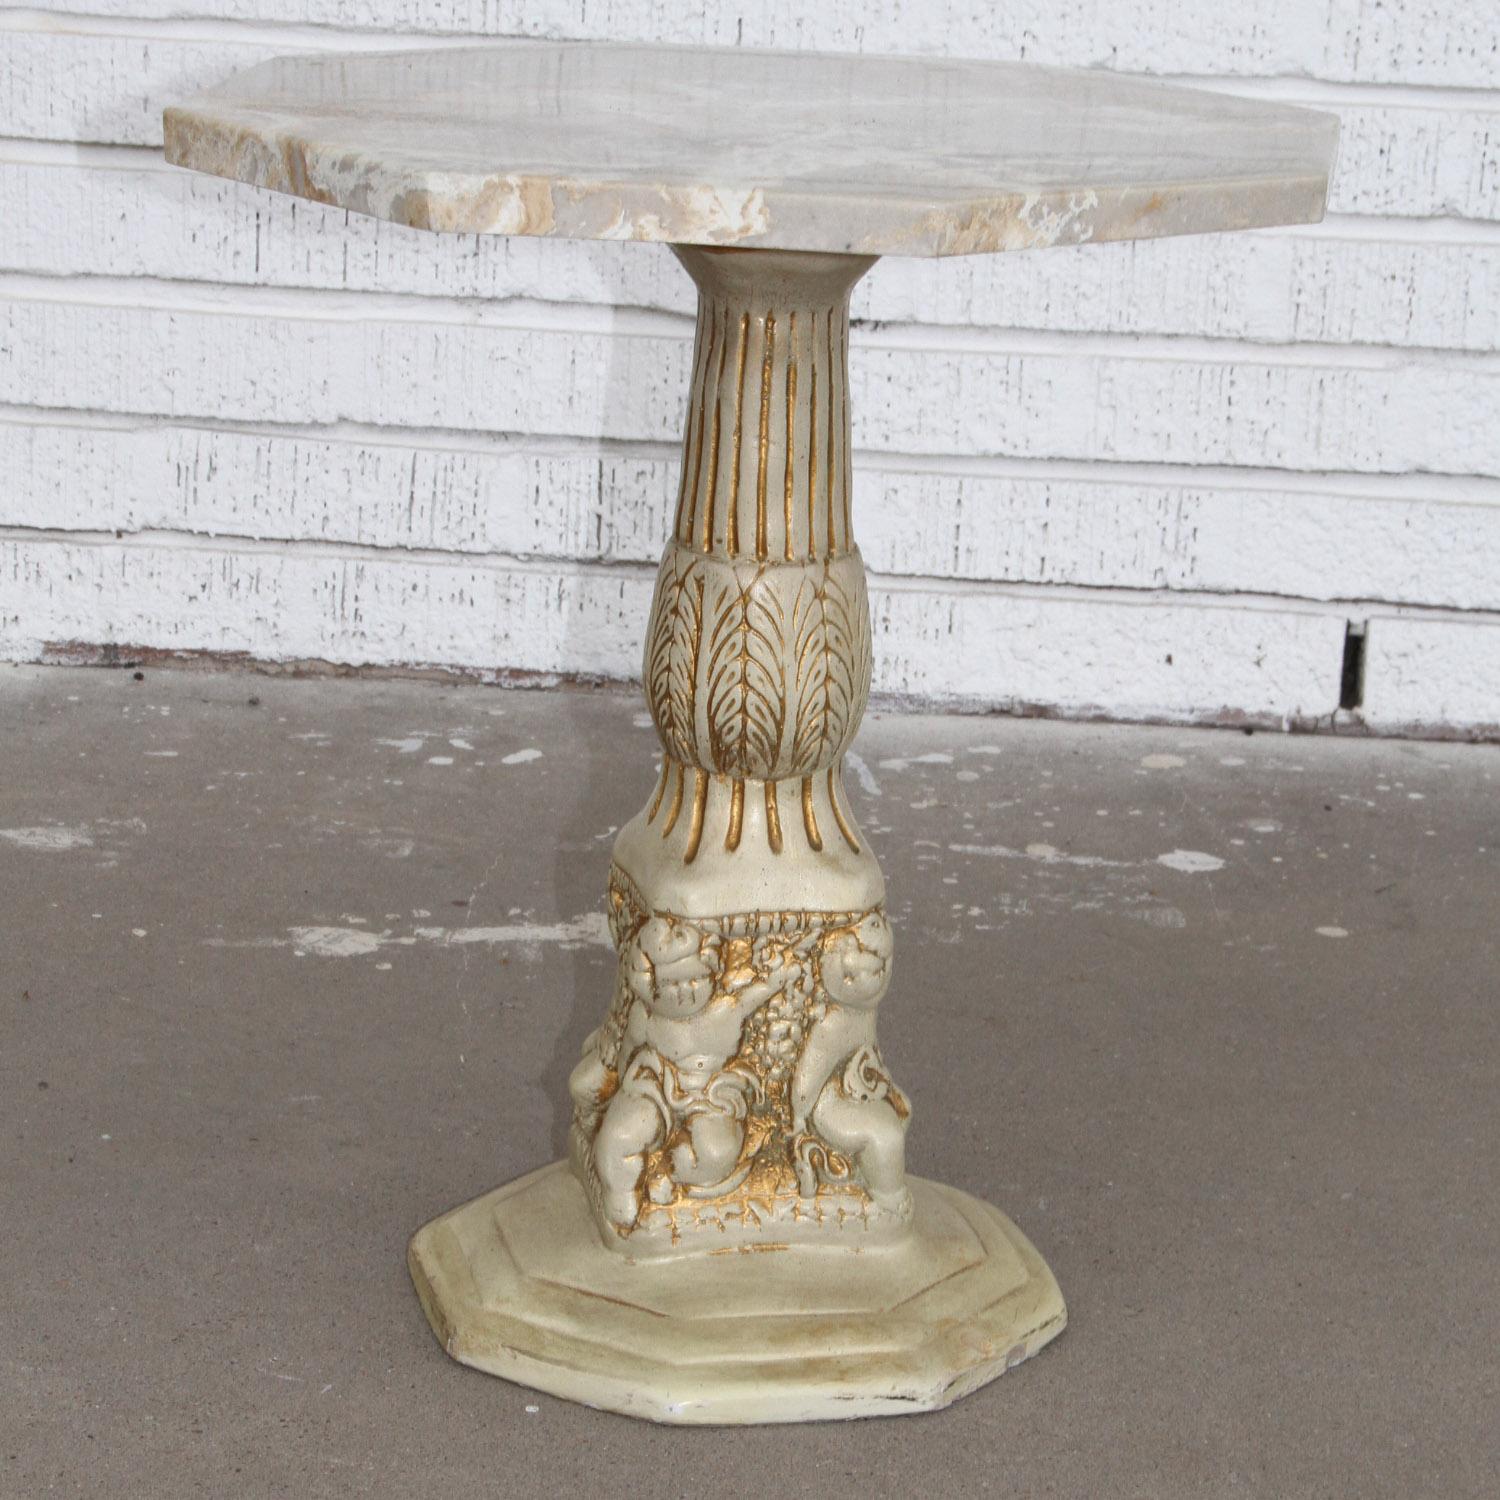 Side table with Octogan stone top 

Vintage side table in cast plaster with a faux marble stone top. The base has a carved design with cherubs around the base. Nice in a sheltered garden or porch.